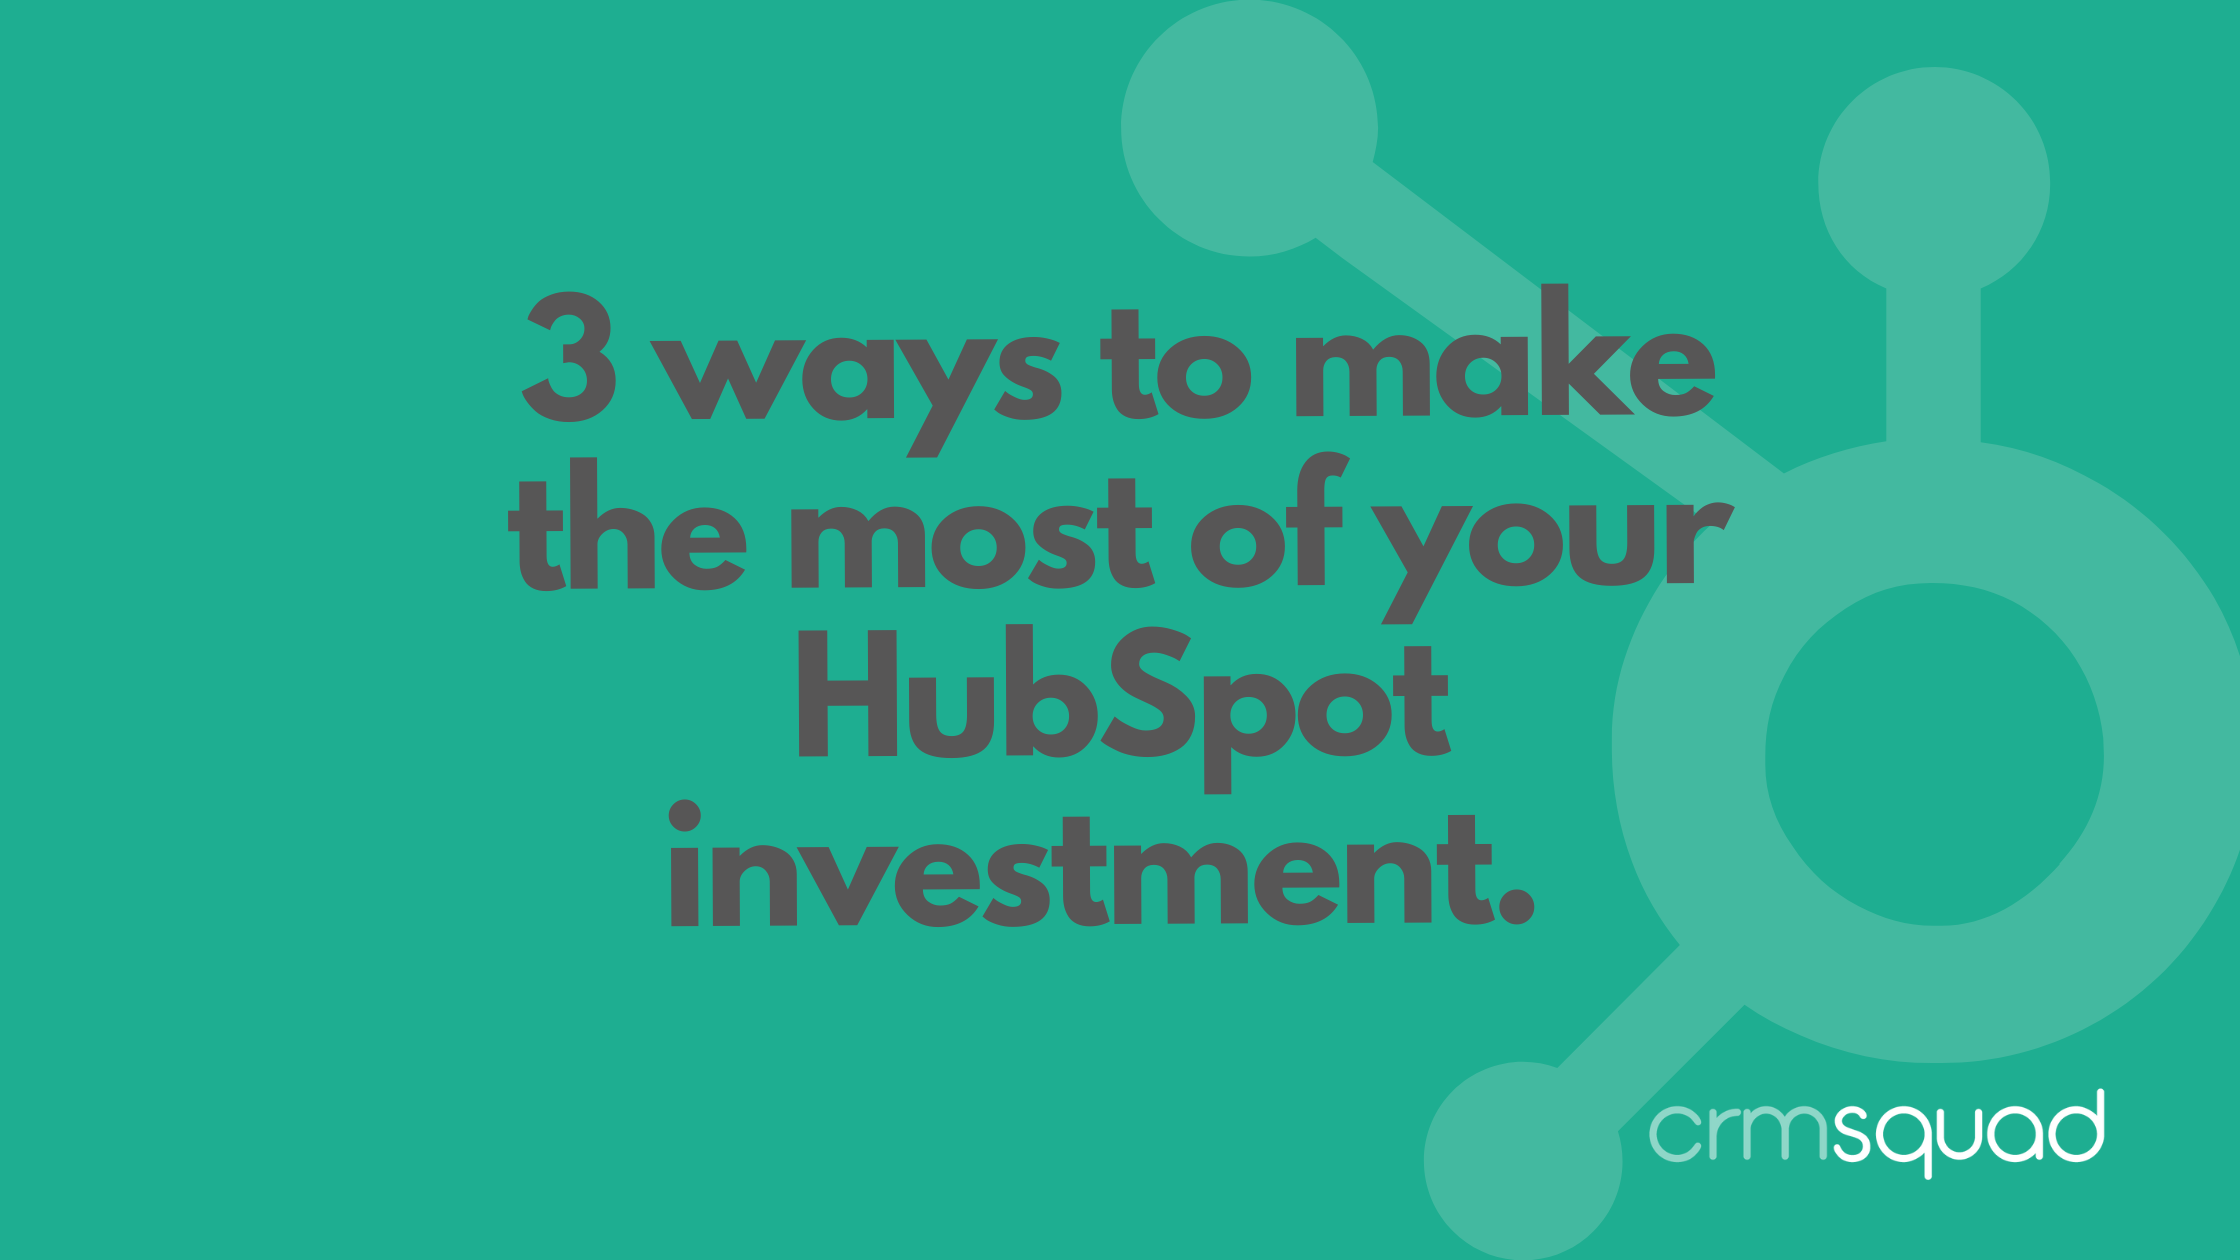 3 ways to start making the most of your HubSpot investment